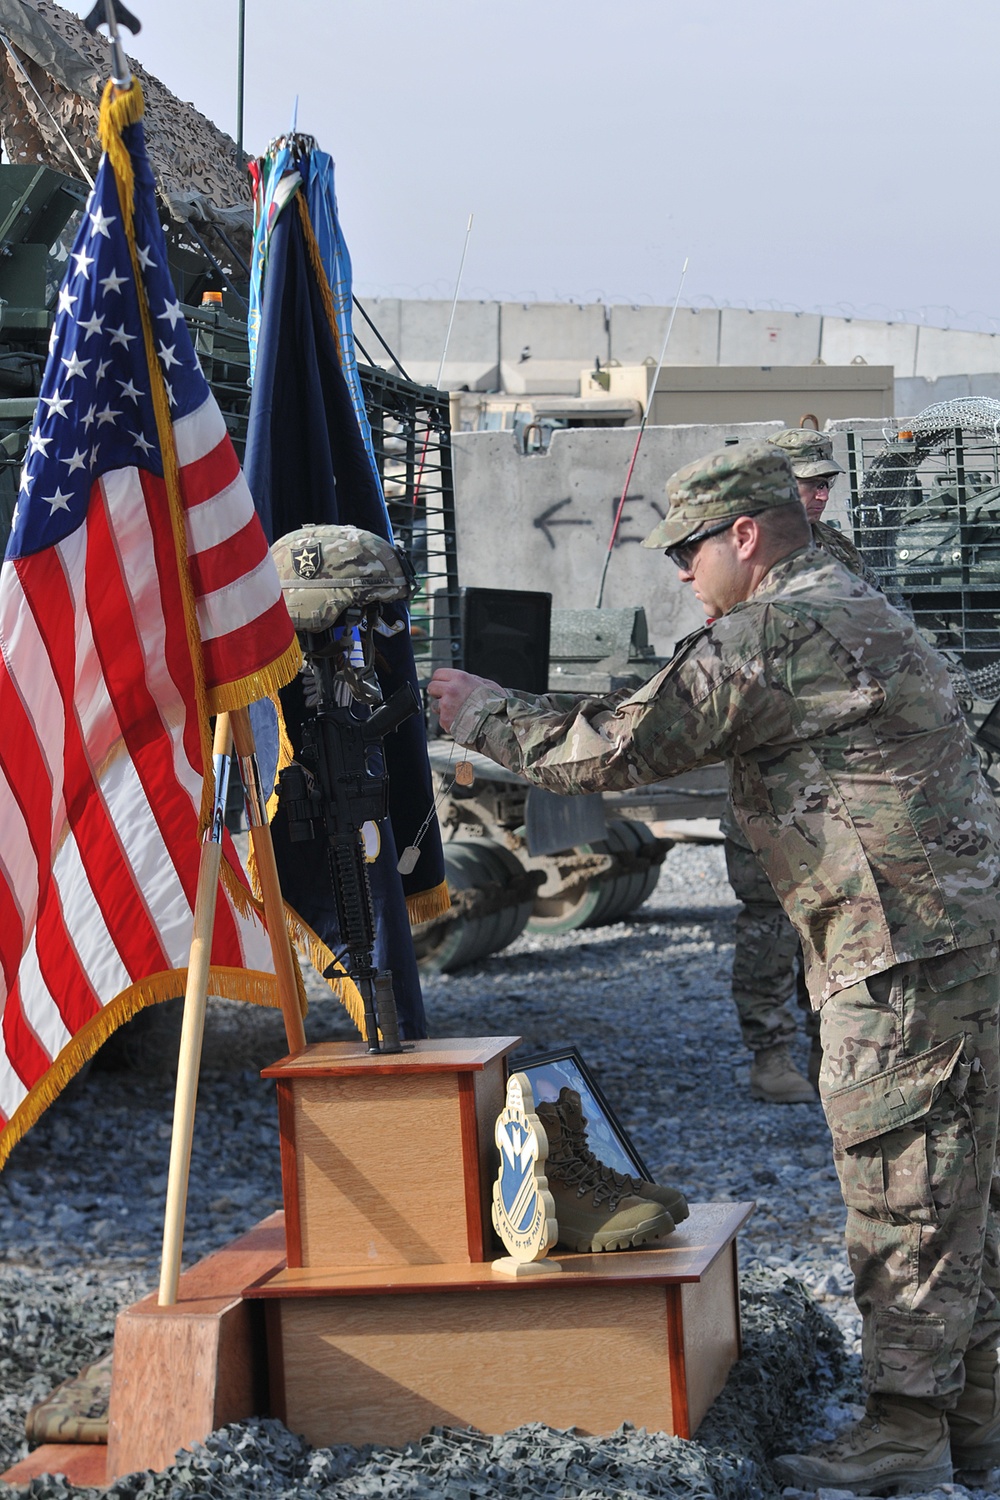 Fallen CTF 4-2 soldier 'will always be remembered as a true American hero'